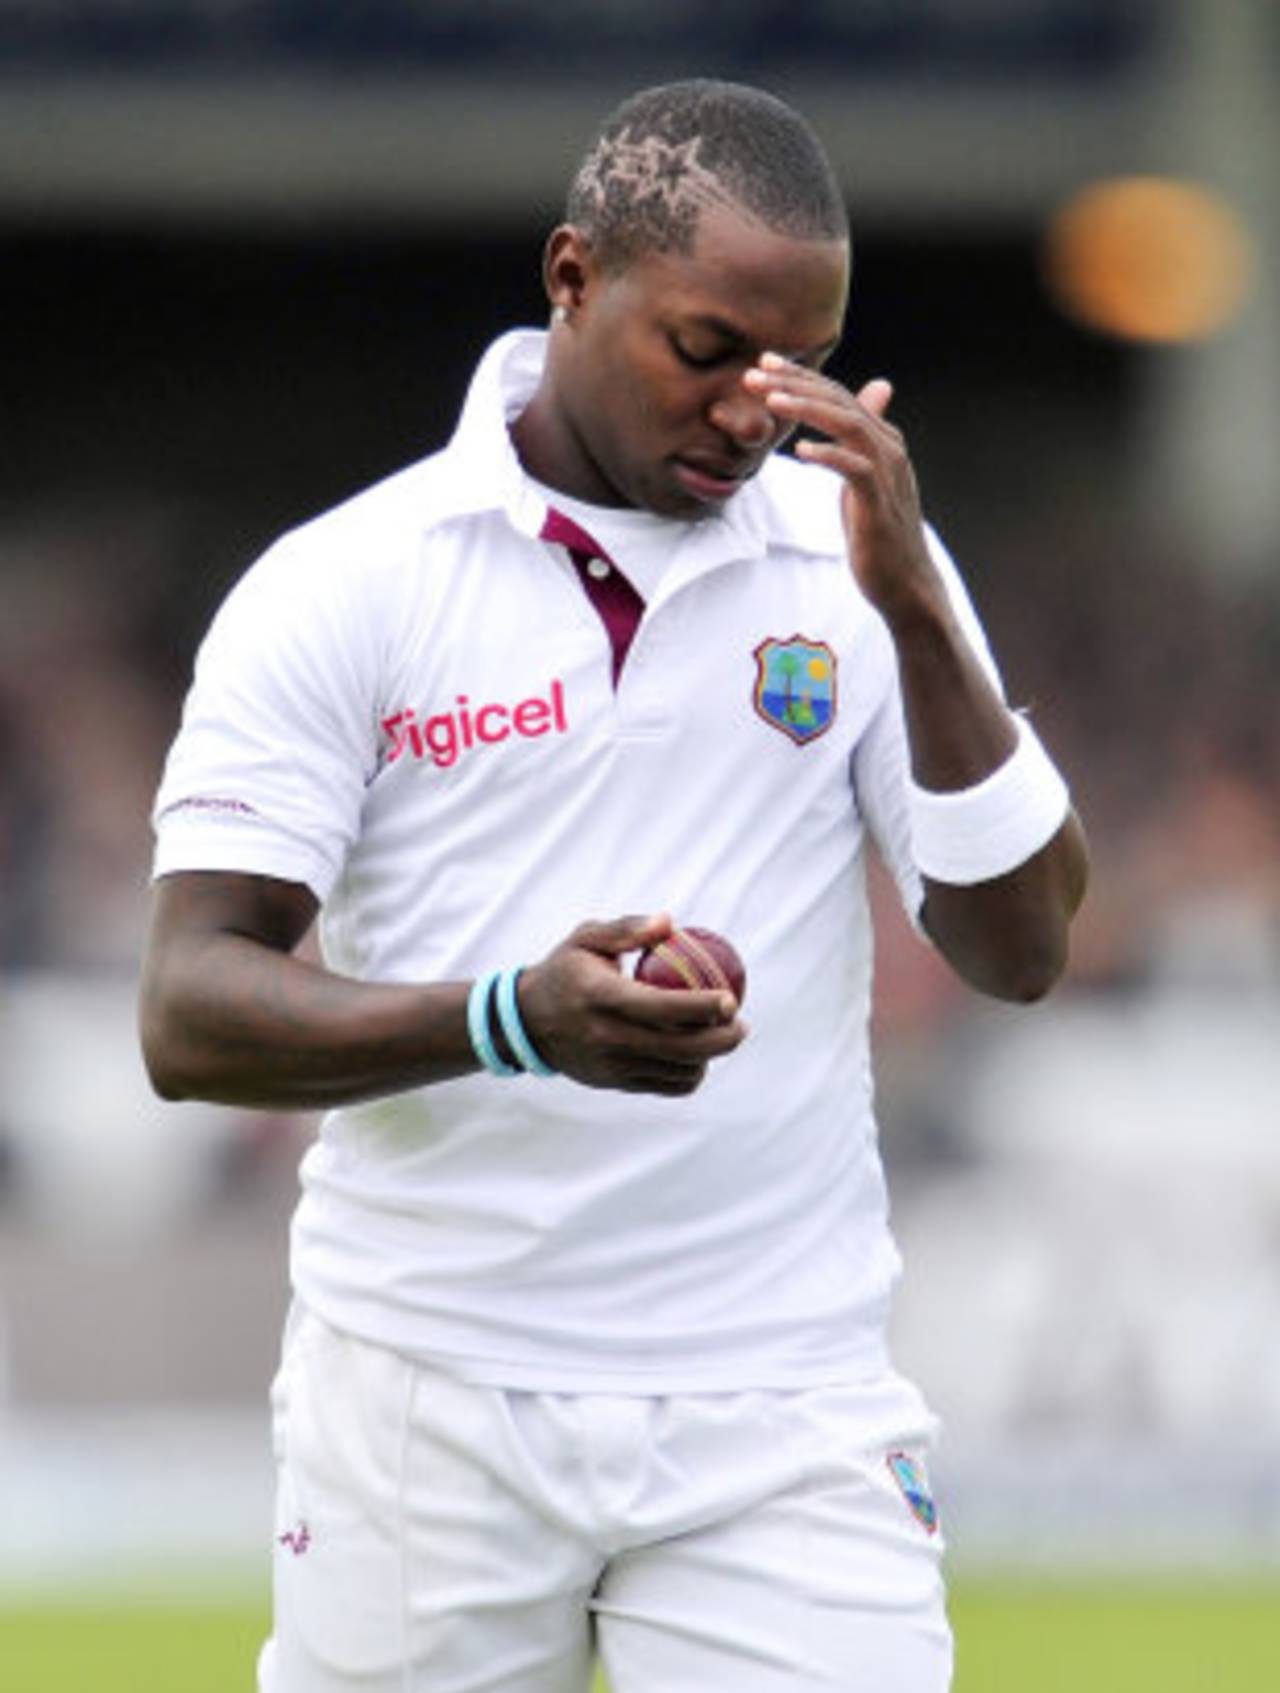 Fidel Edwards inspects the ball on a difficult day for West Indies' bowlers, England v West Indies, 1st Test, Lord's, 2nd day, May 18, 2012